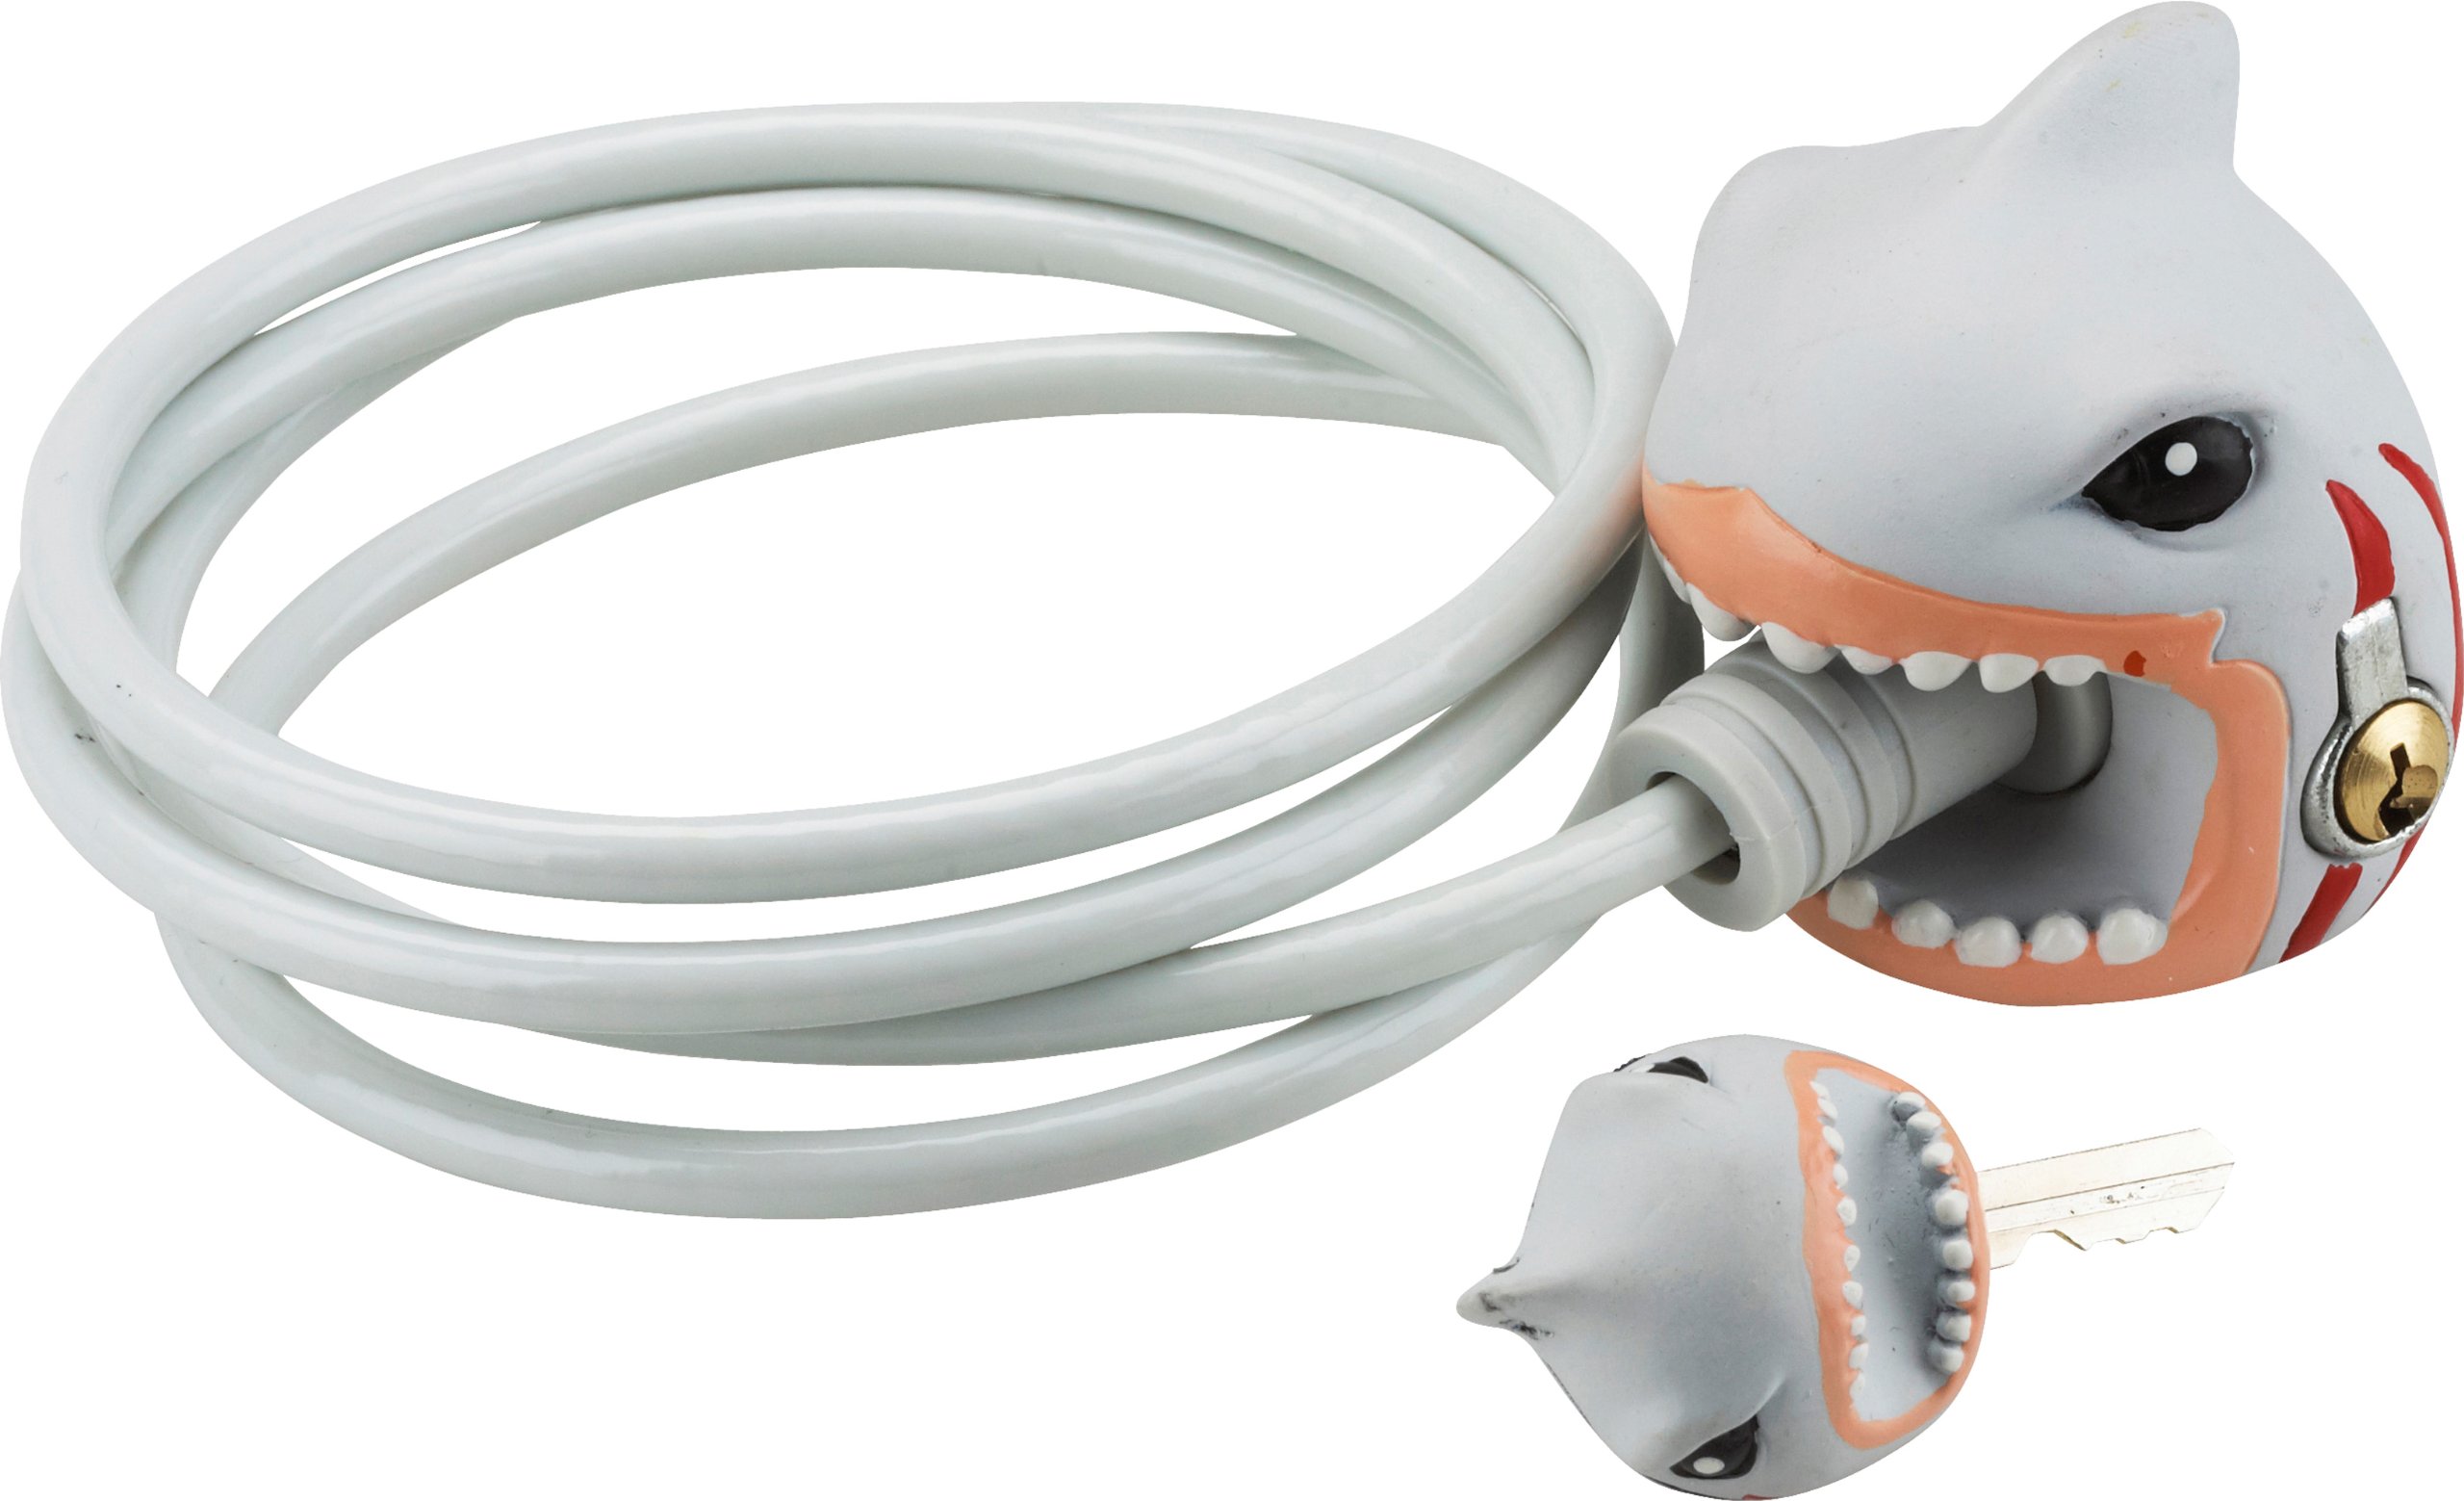 CZK06 Crazy Safety White Shark Cable Lock